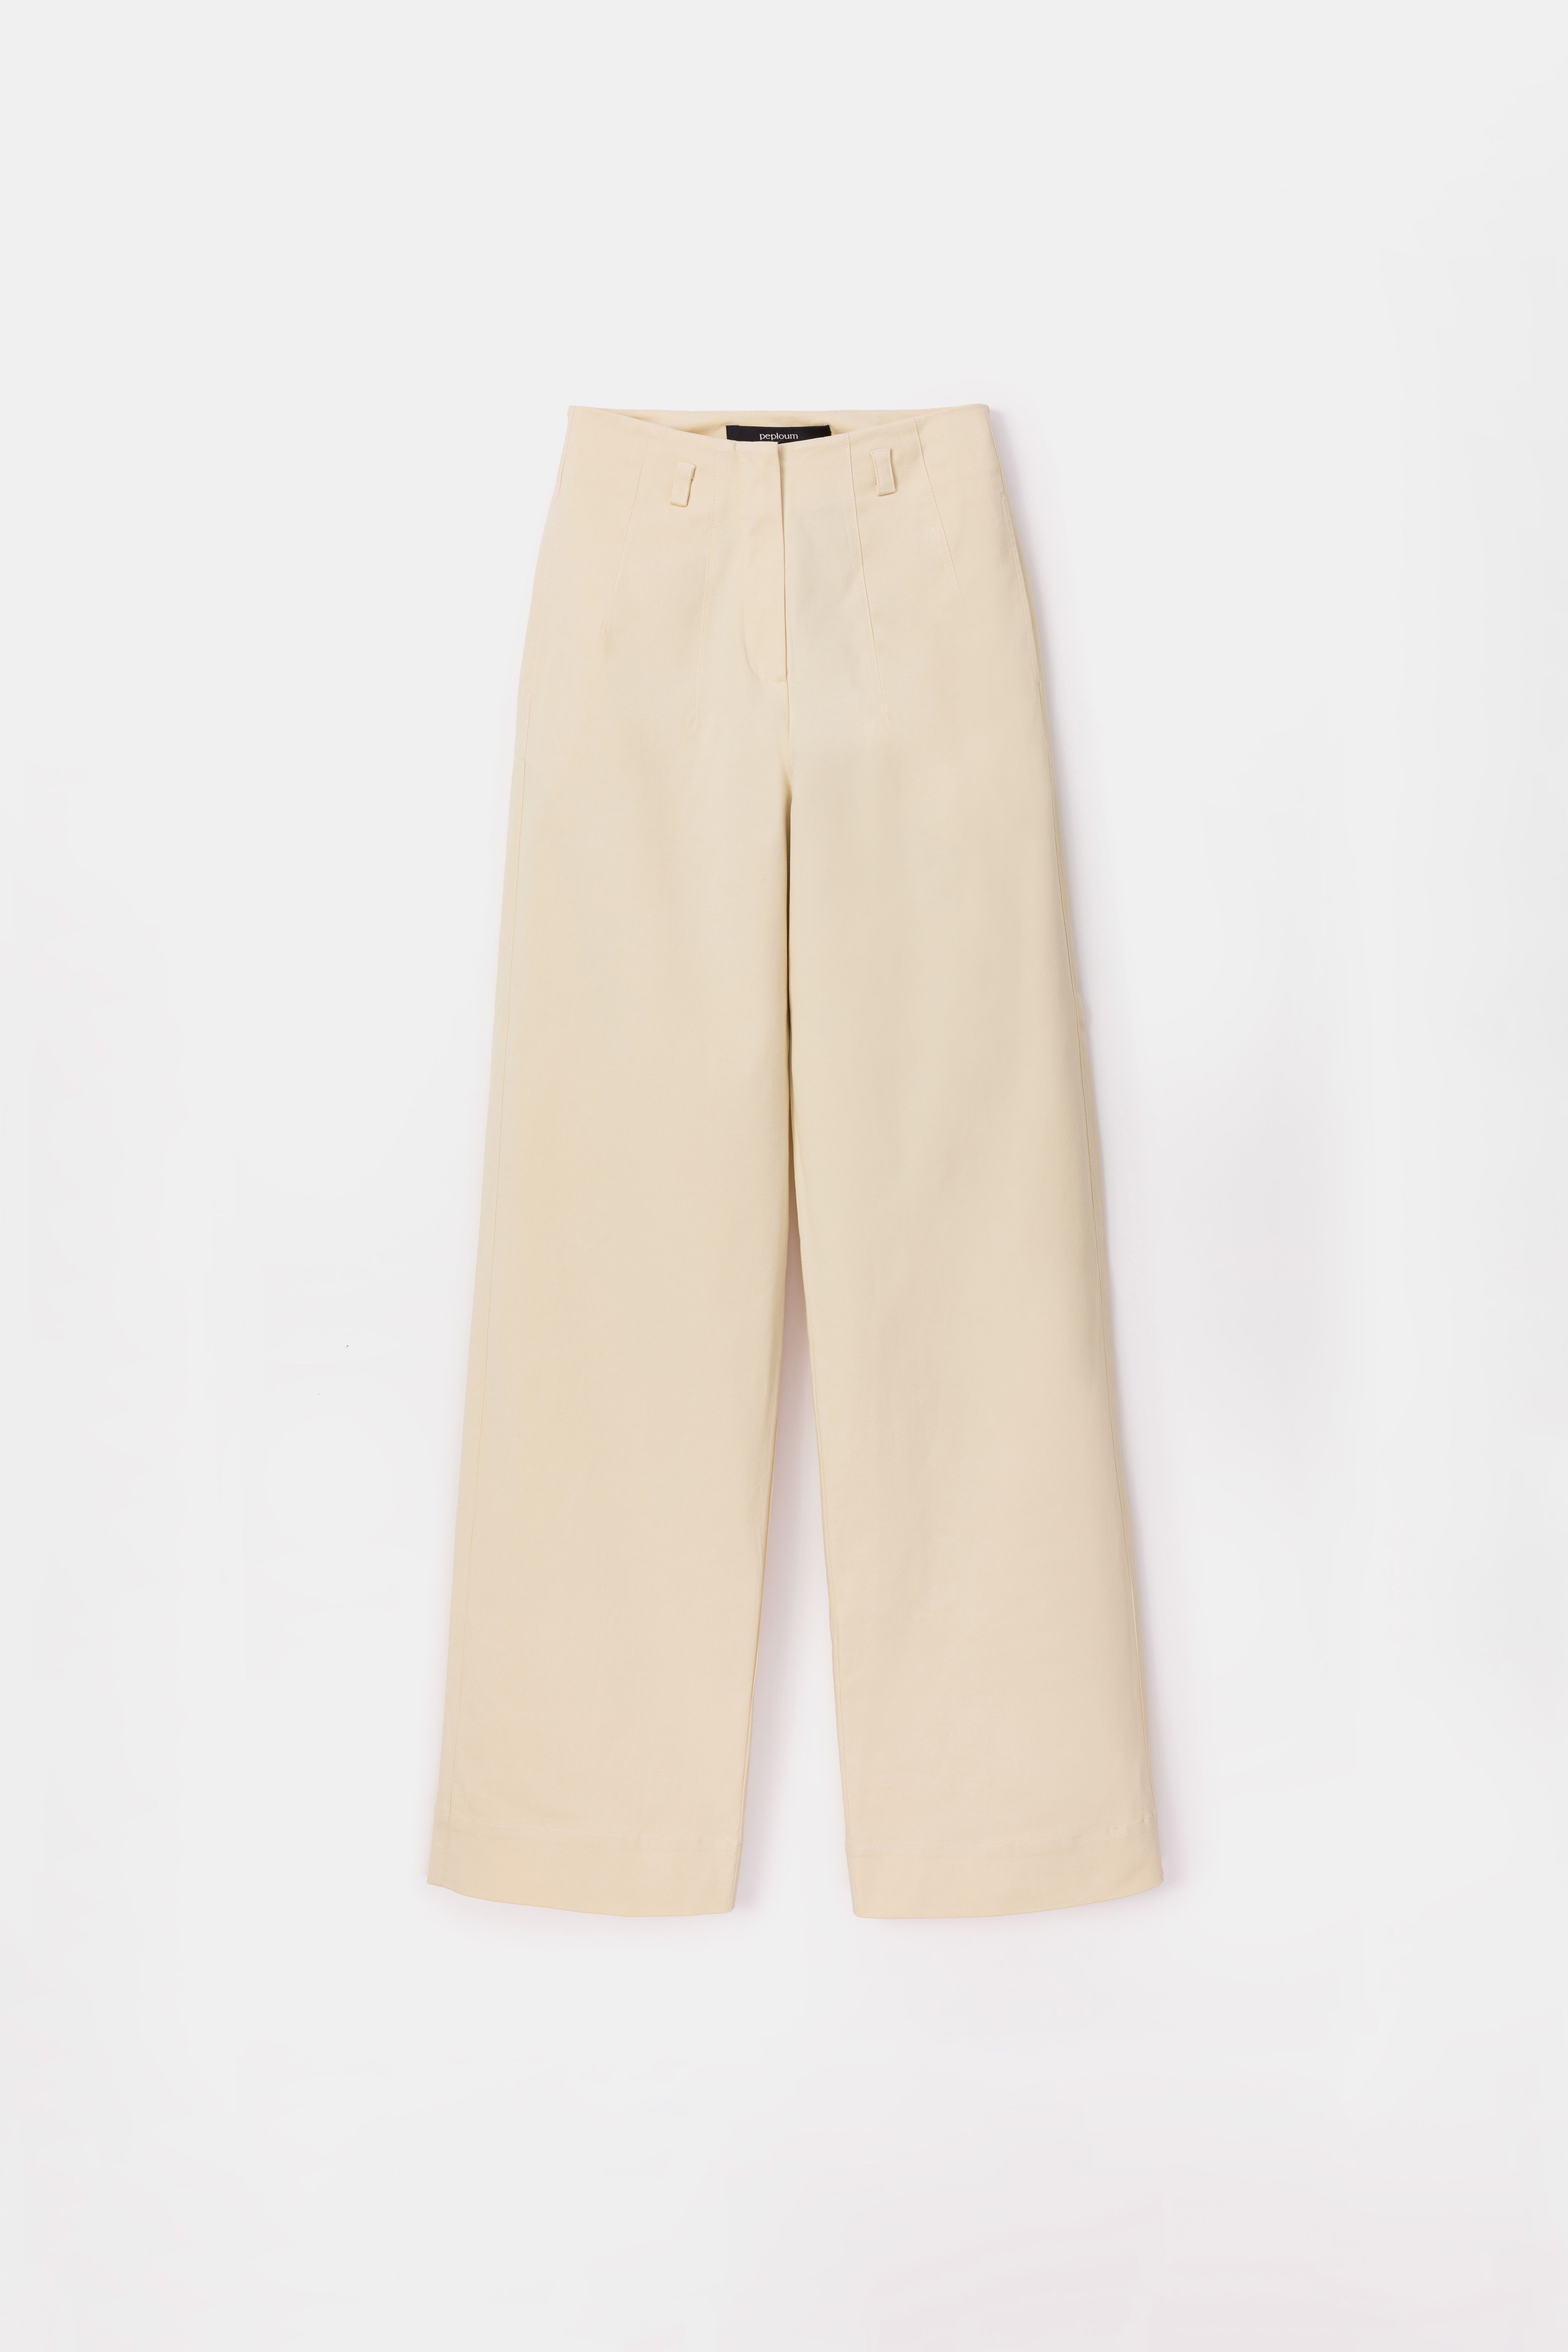 Toba Trousers in Eggnog Yellow